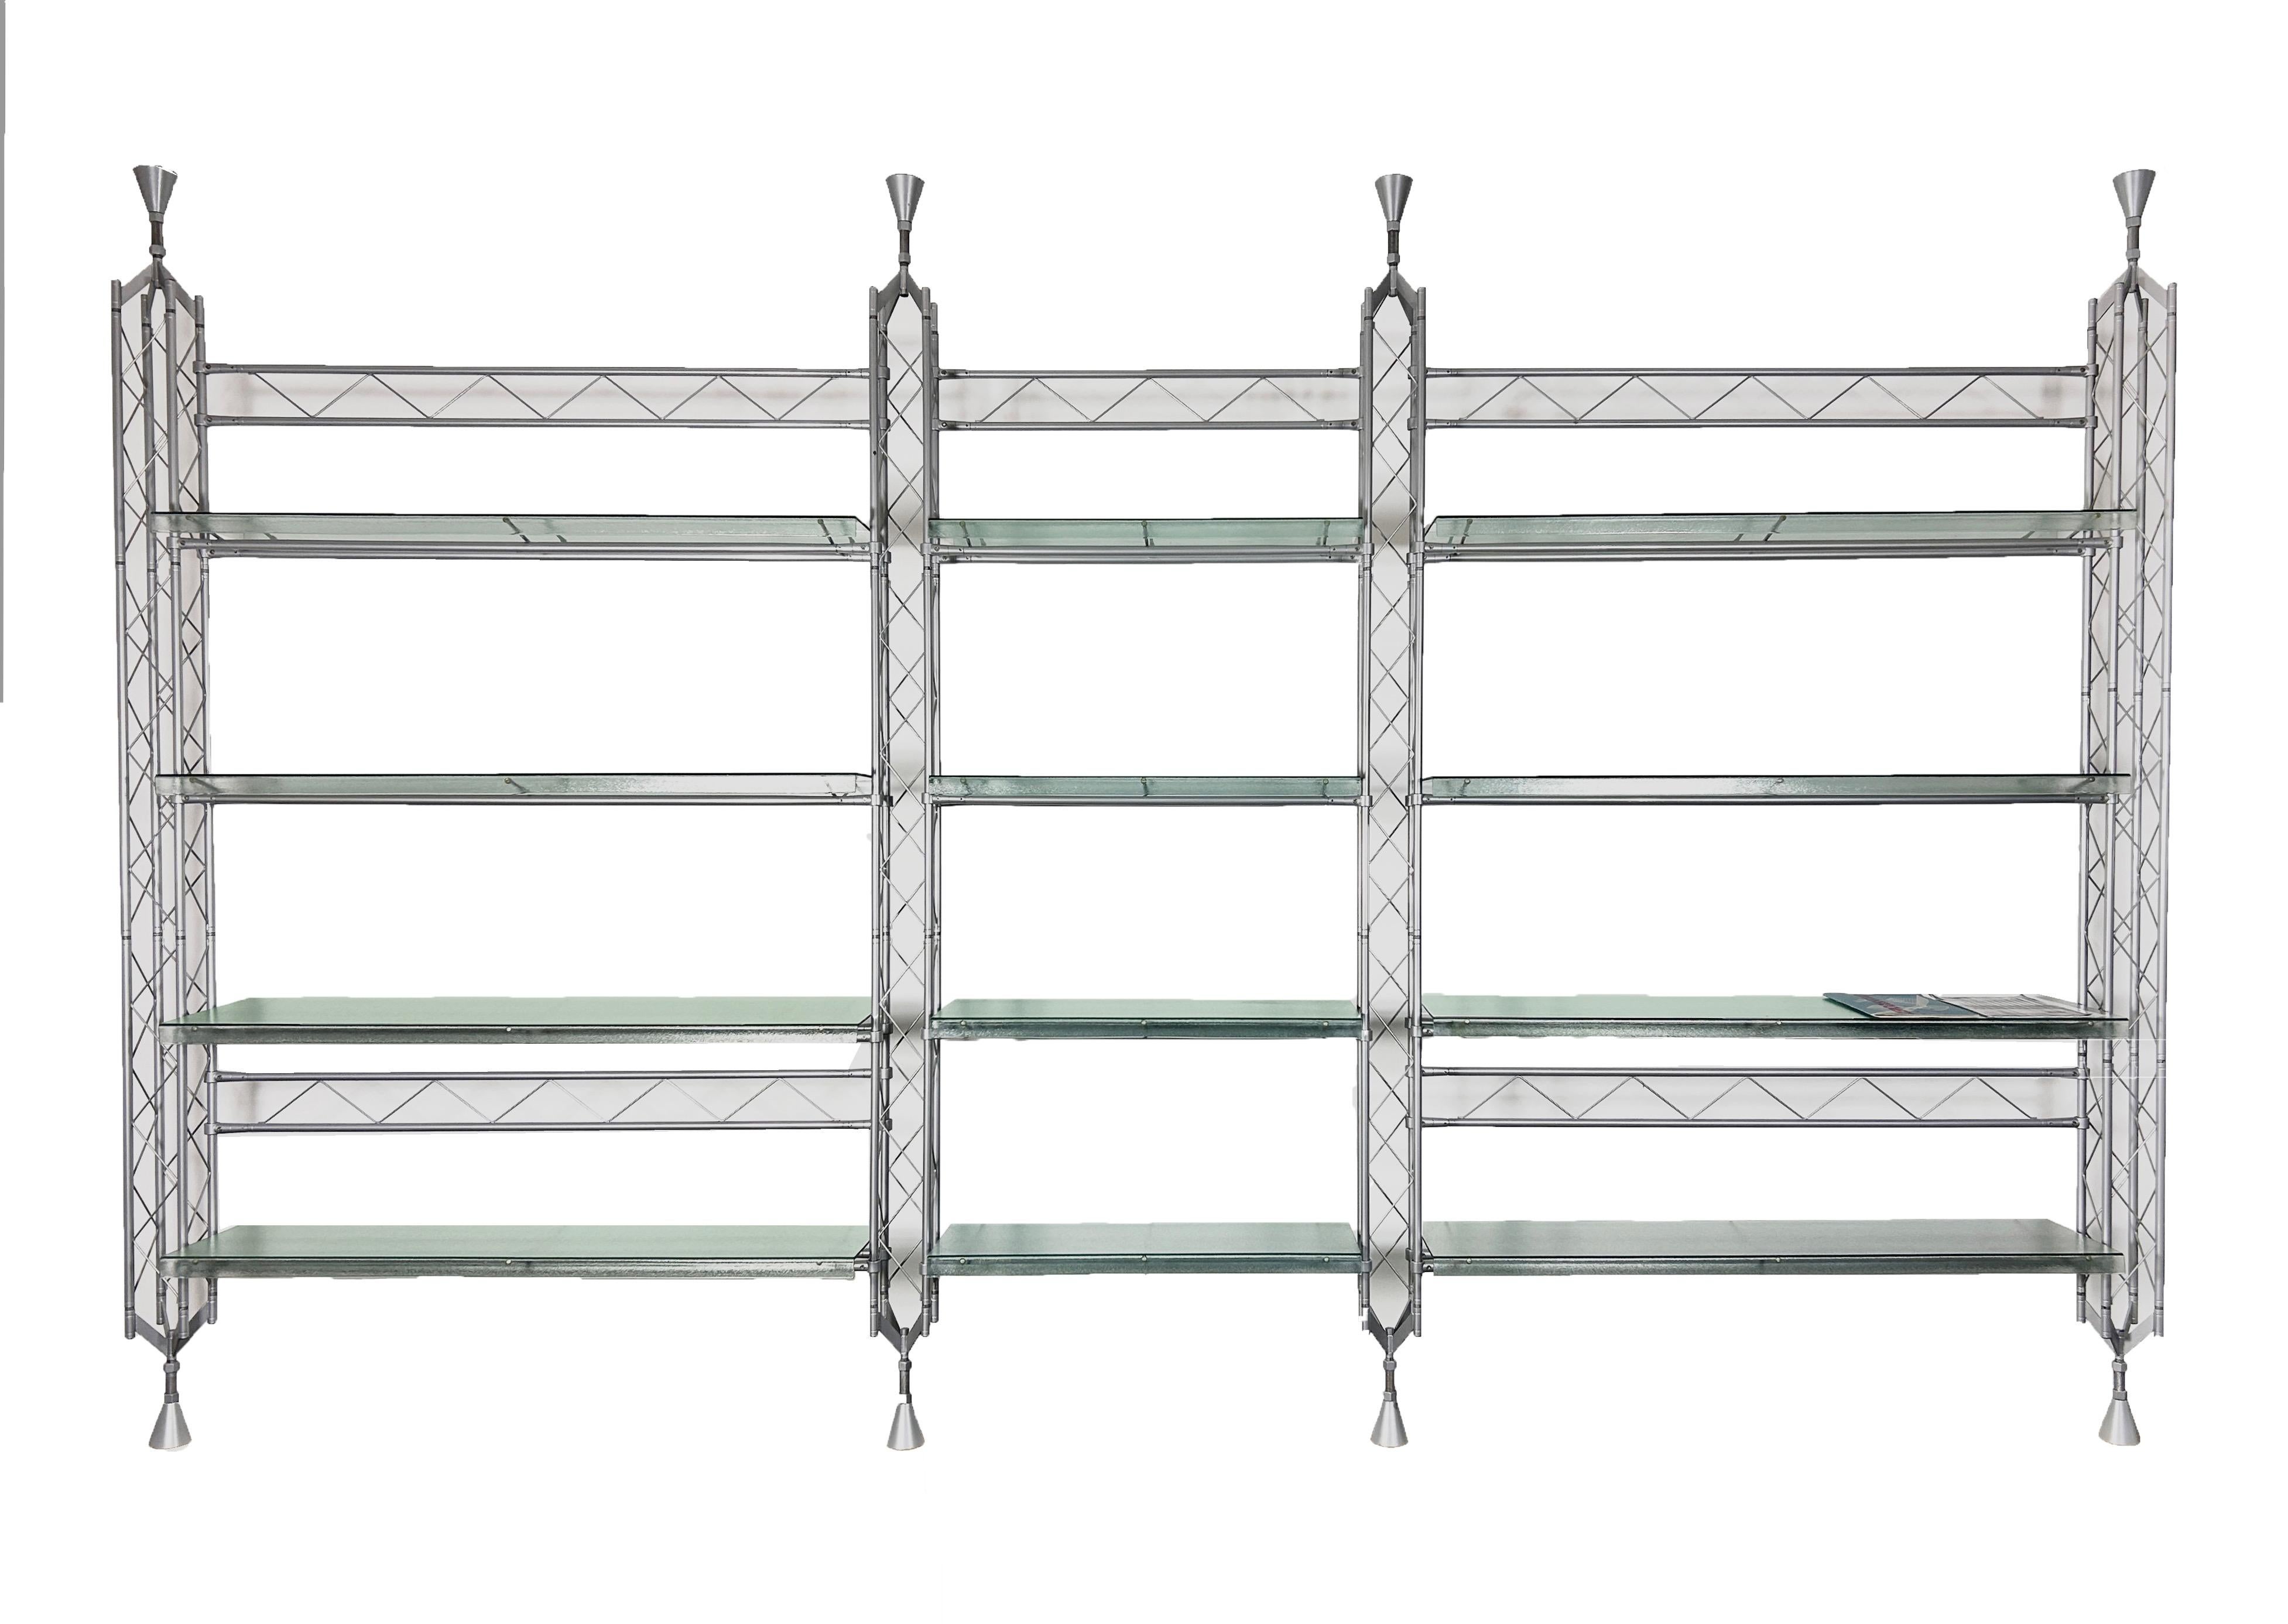 Large Post-modern Abracadabra shelf unit, Laquered Aluminum construction with u-shaped glass shelves.

designed by Italian architects De Pas, D‘Urbino &  Lomazzi (Studio DDL)

manufactured by Zerodisegnio, Italy, signed with makers embleme.

The